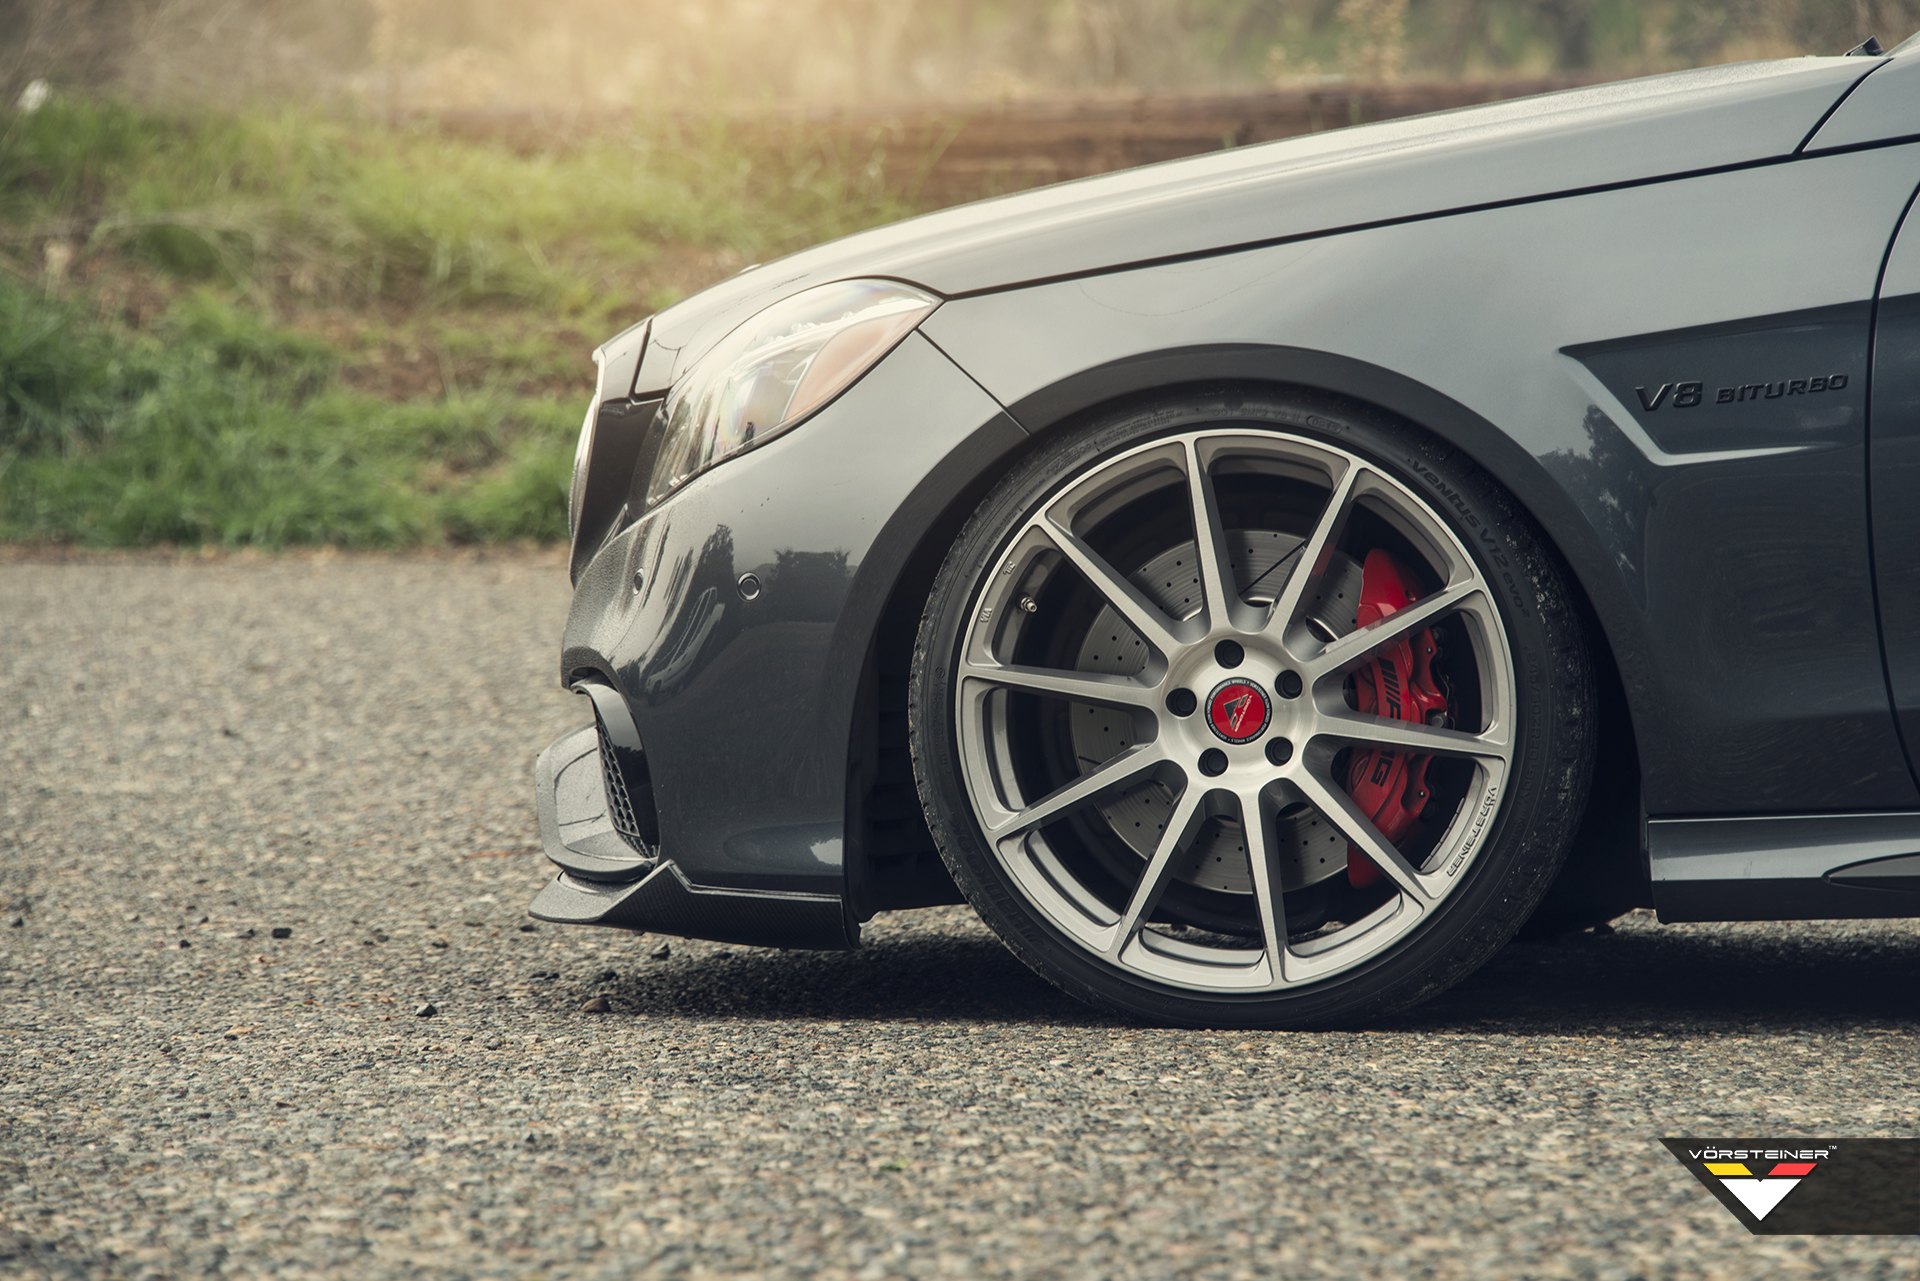 Black Mercedes E Class with Hankook Ventus Tires - Photo by Vorstiner